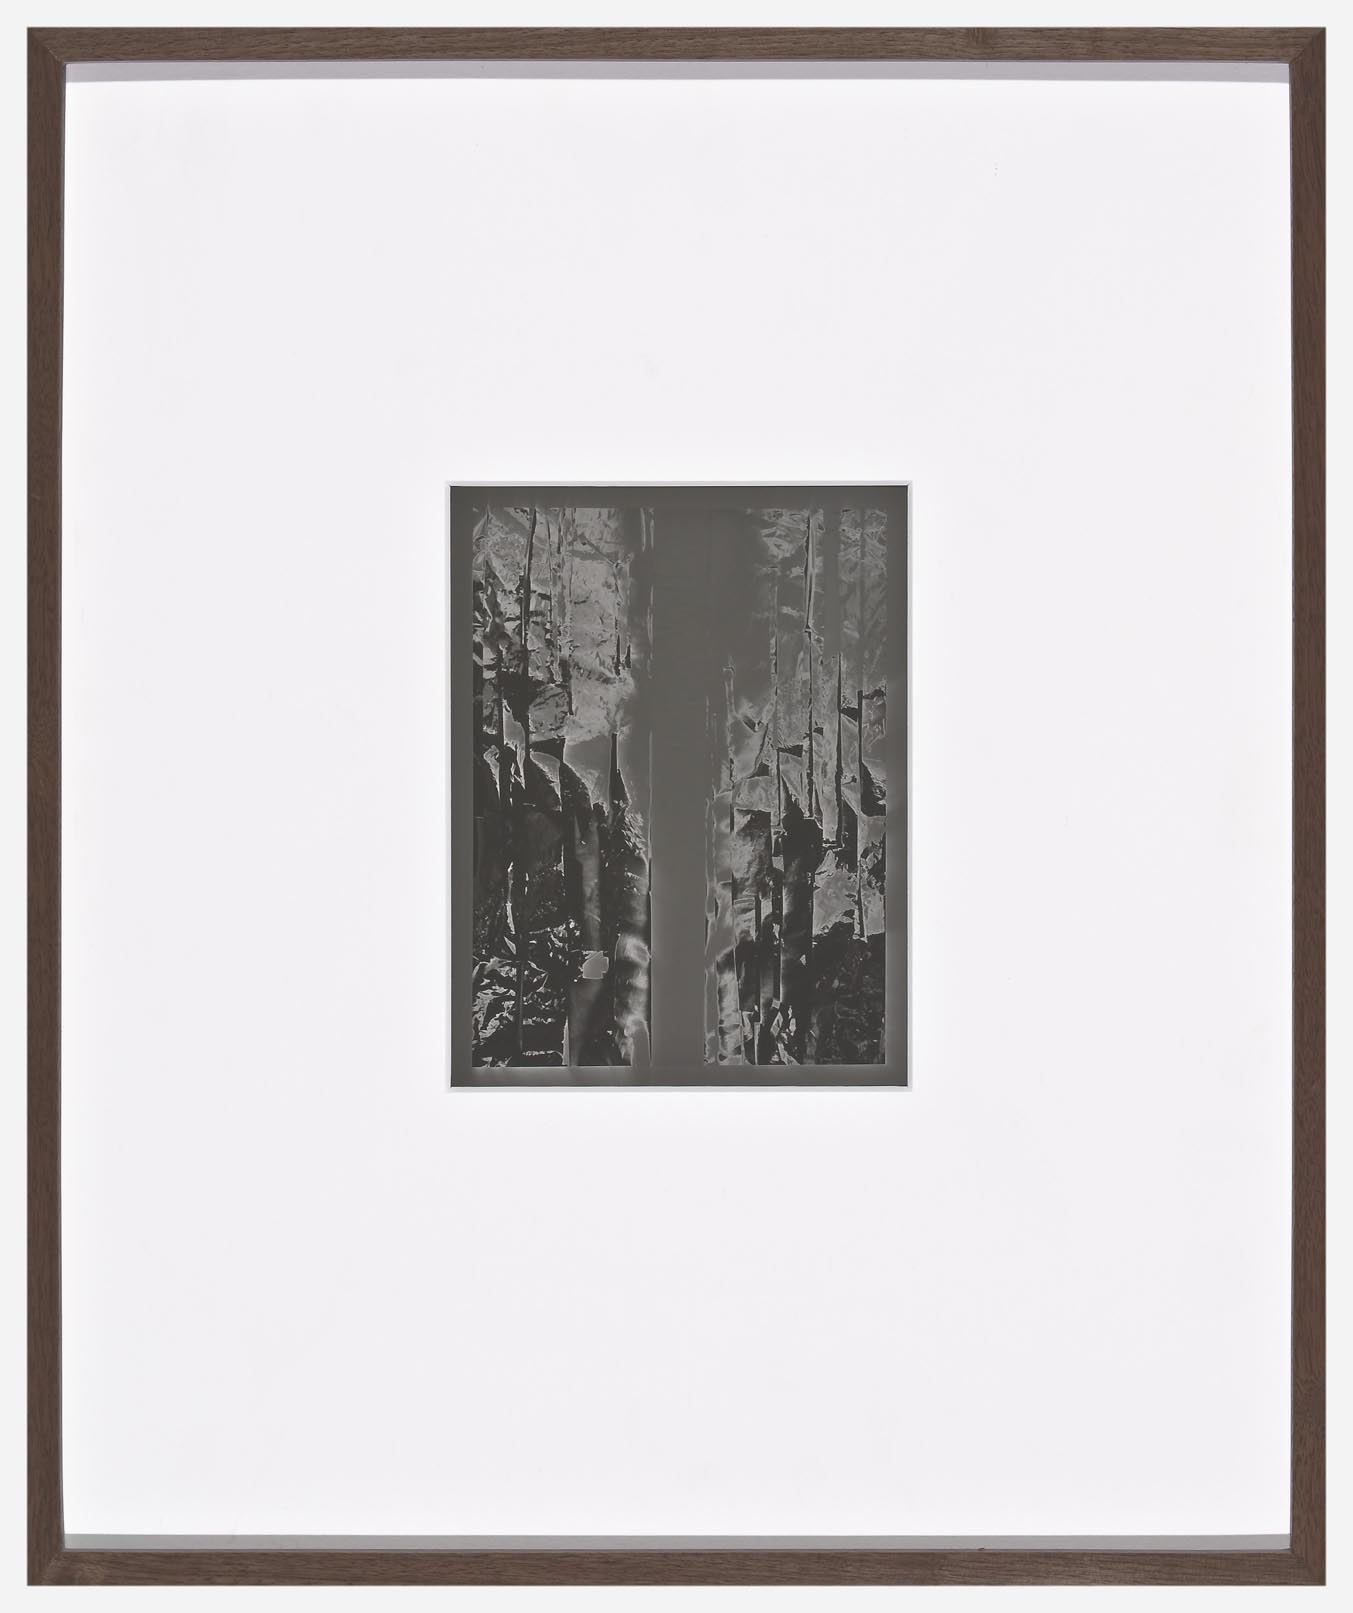     Anthony Pearson Untitled (Solarisation) 2007 unique framed silver gelatin photograph 43.2 x 35.6 cm 